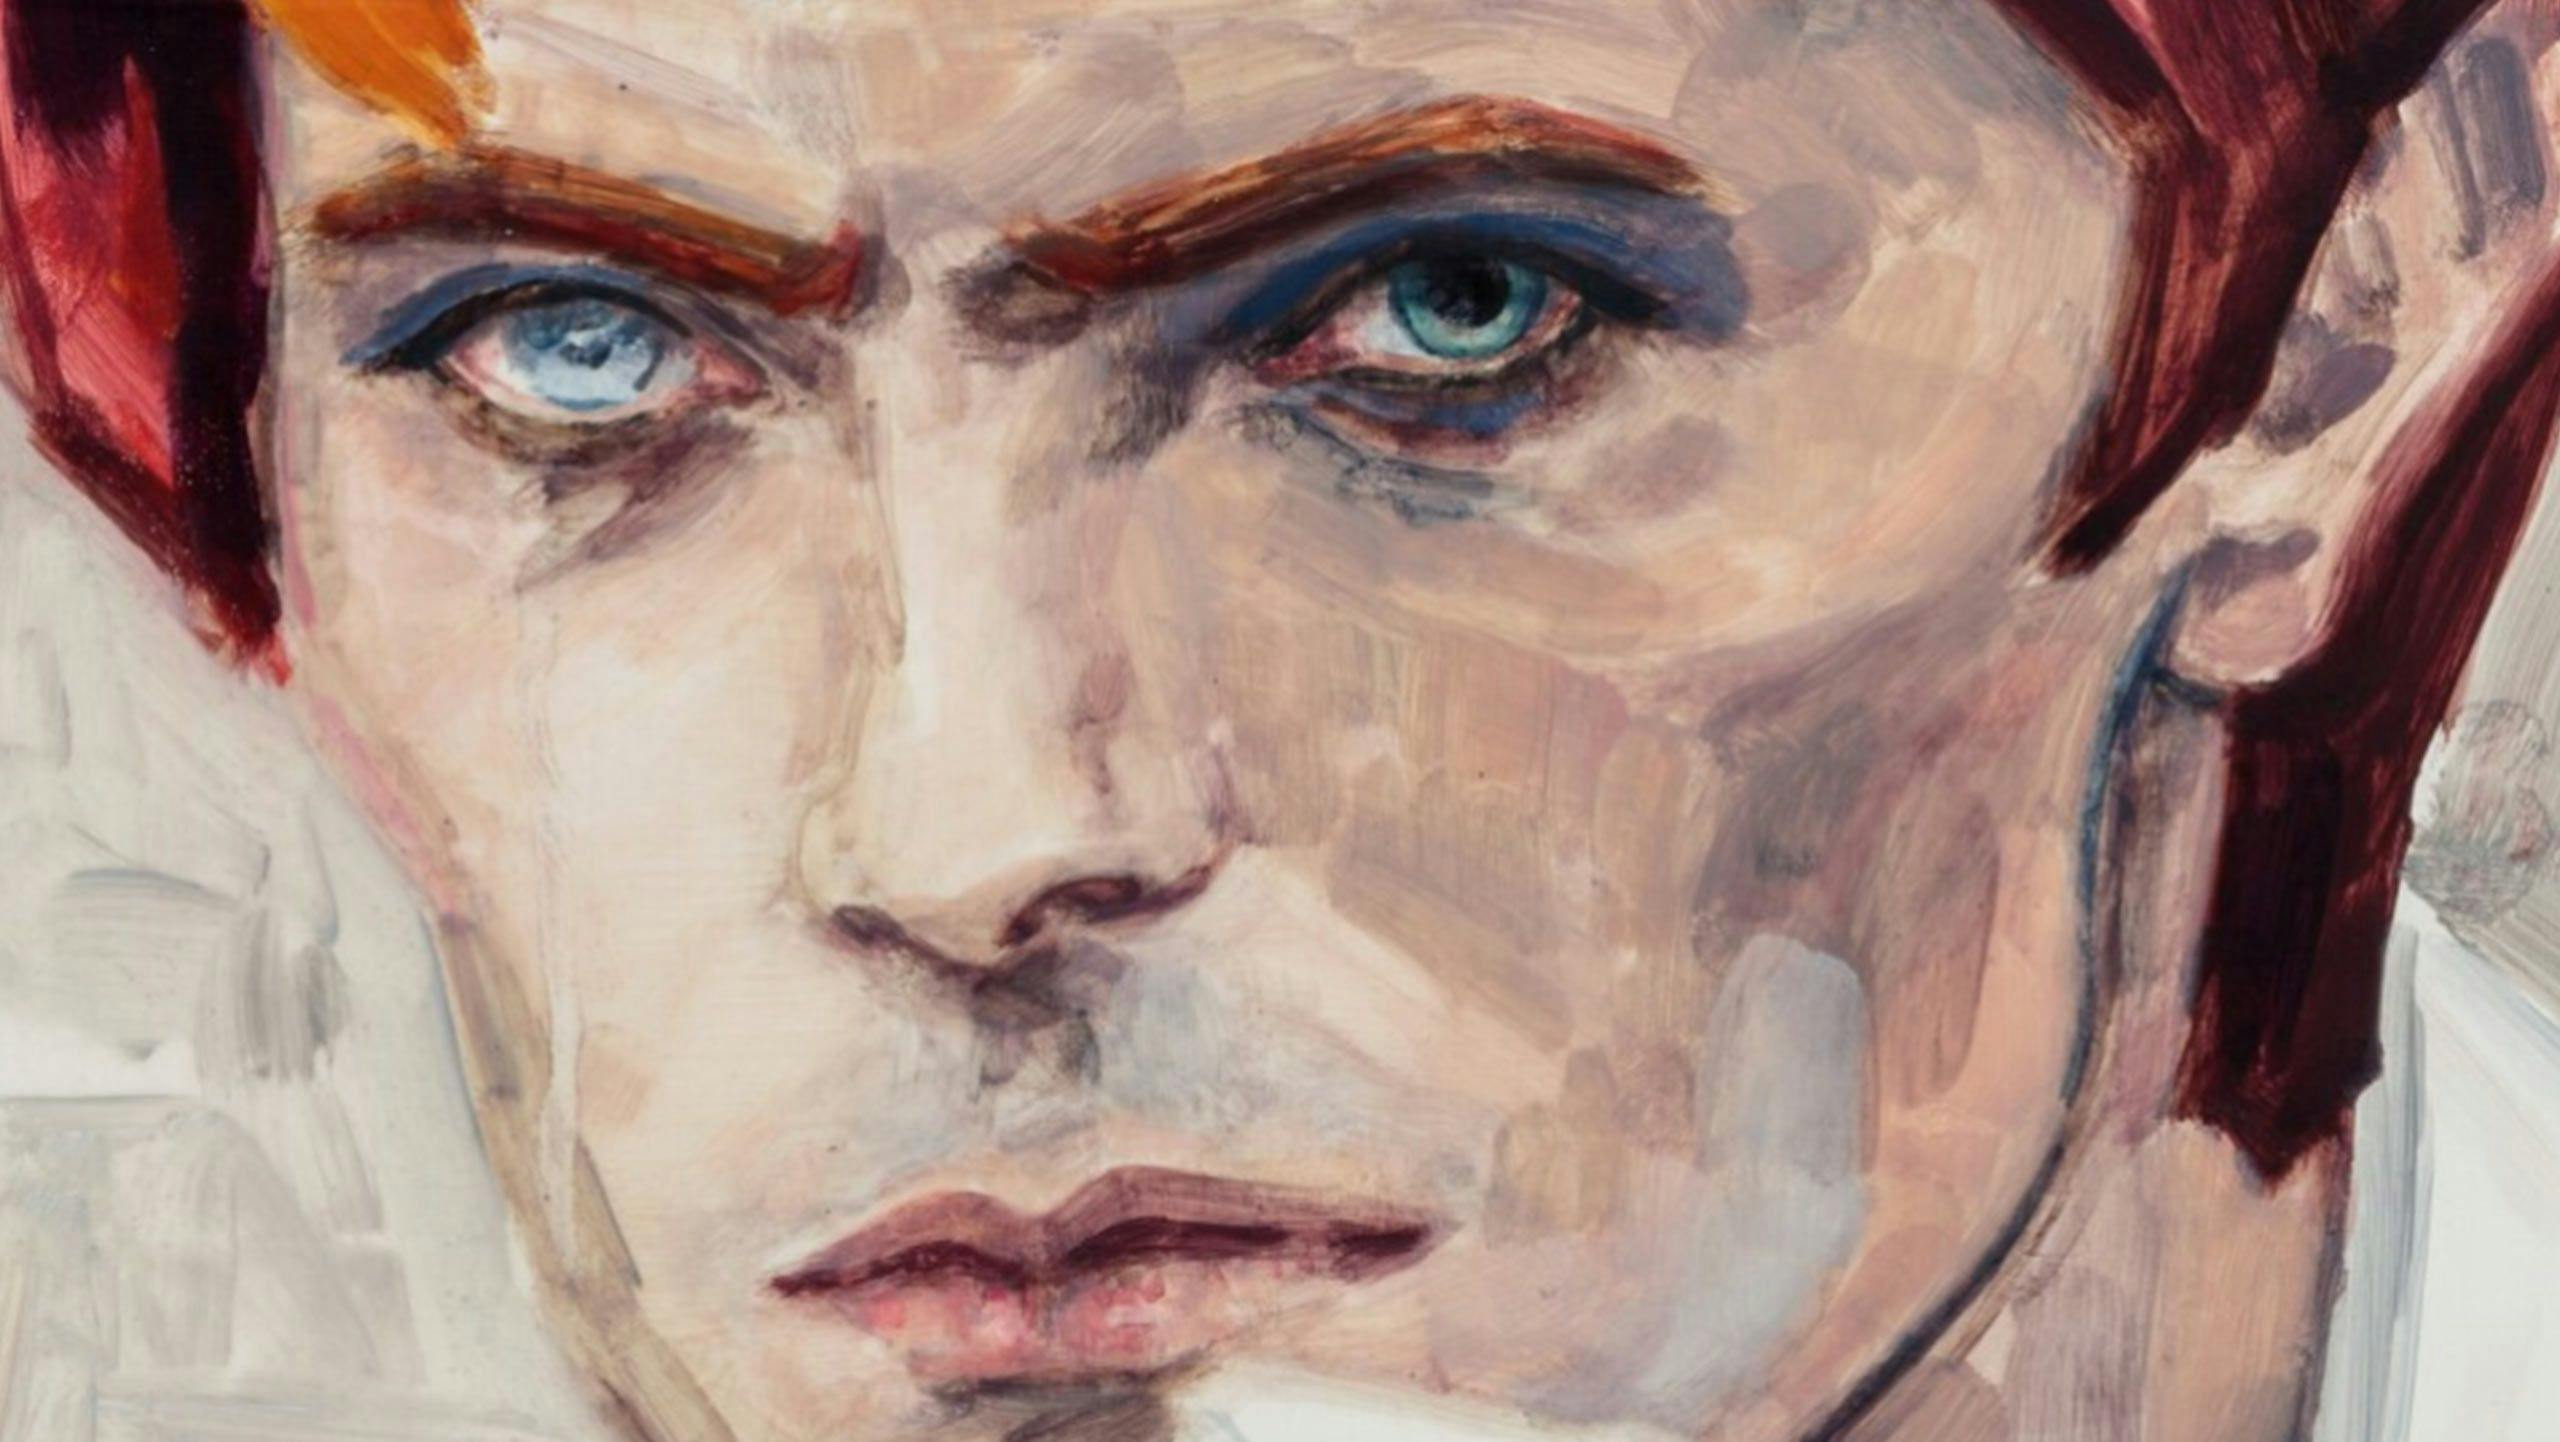 A painting by Elizabeth Peyton titled David Bowie, dated 2012.